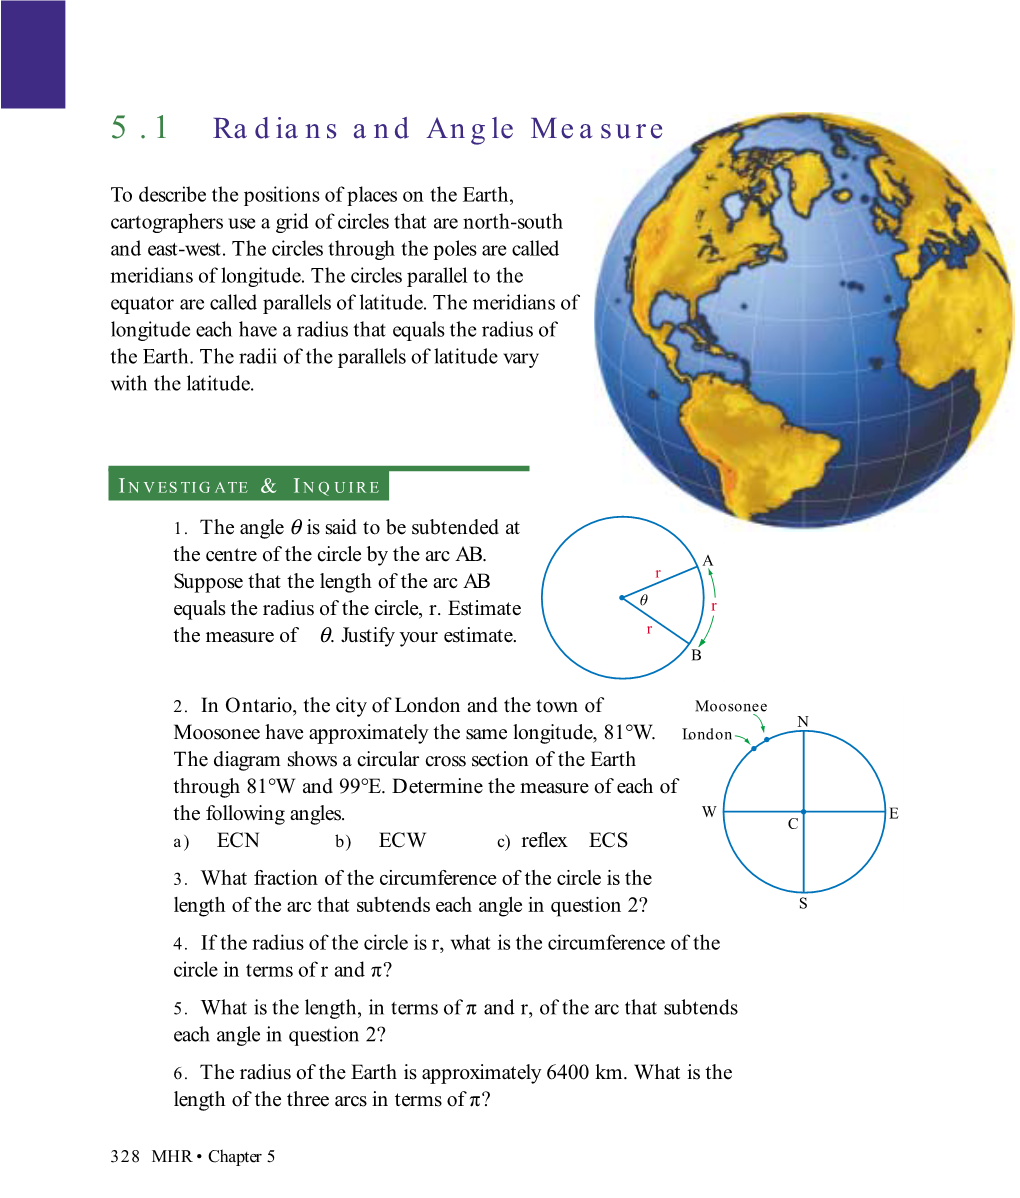 5.1 Radians and Angle Measure